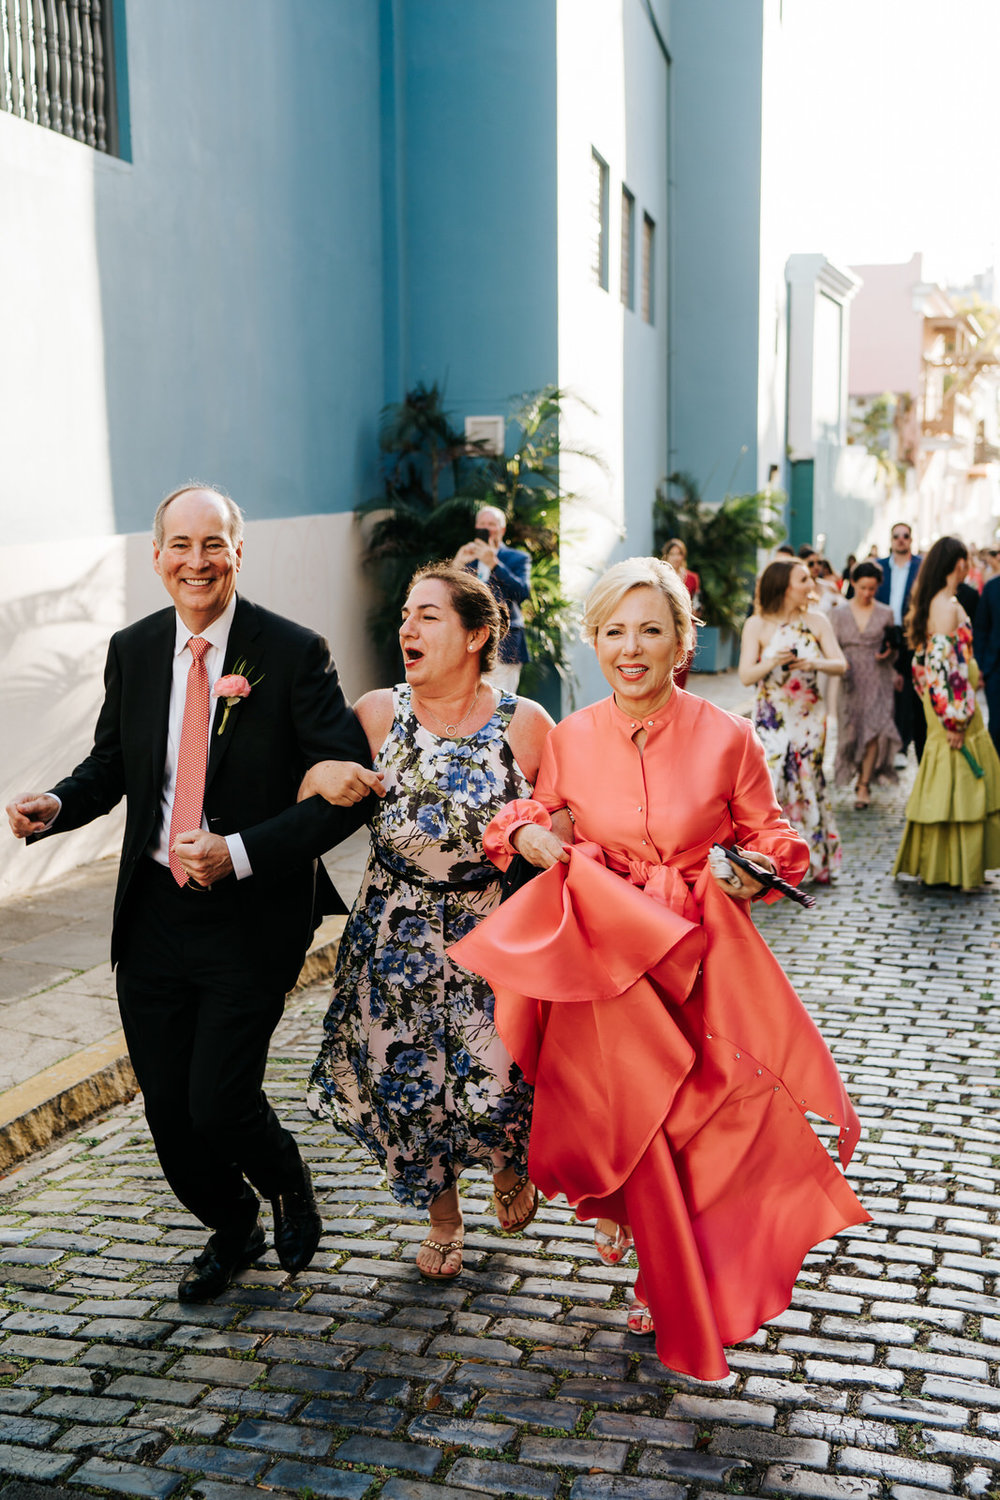  Groom's parents and a friend seen dancing and smiling as they walk towards the El Convento for the wedding reception 